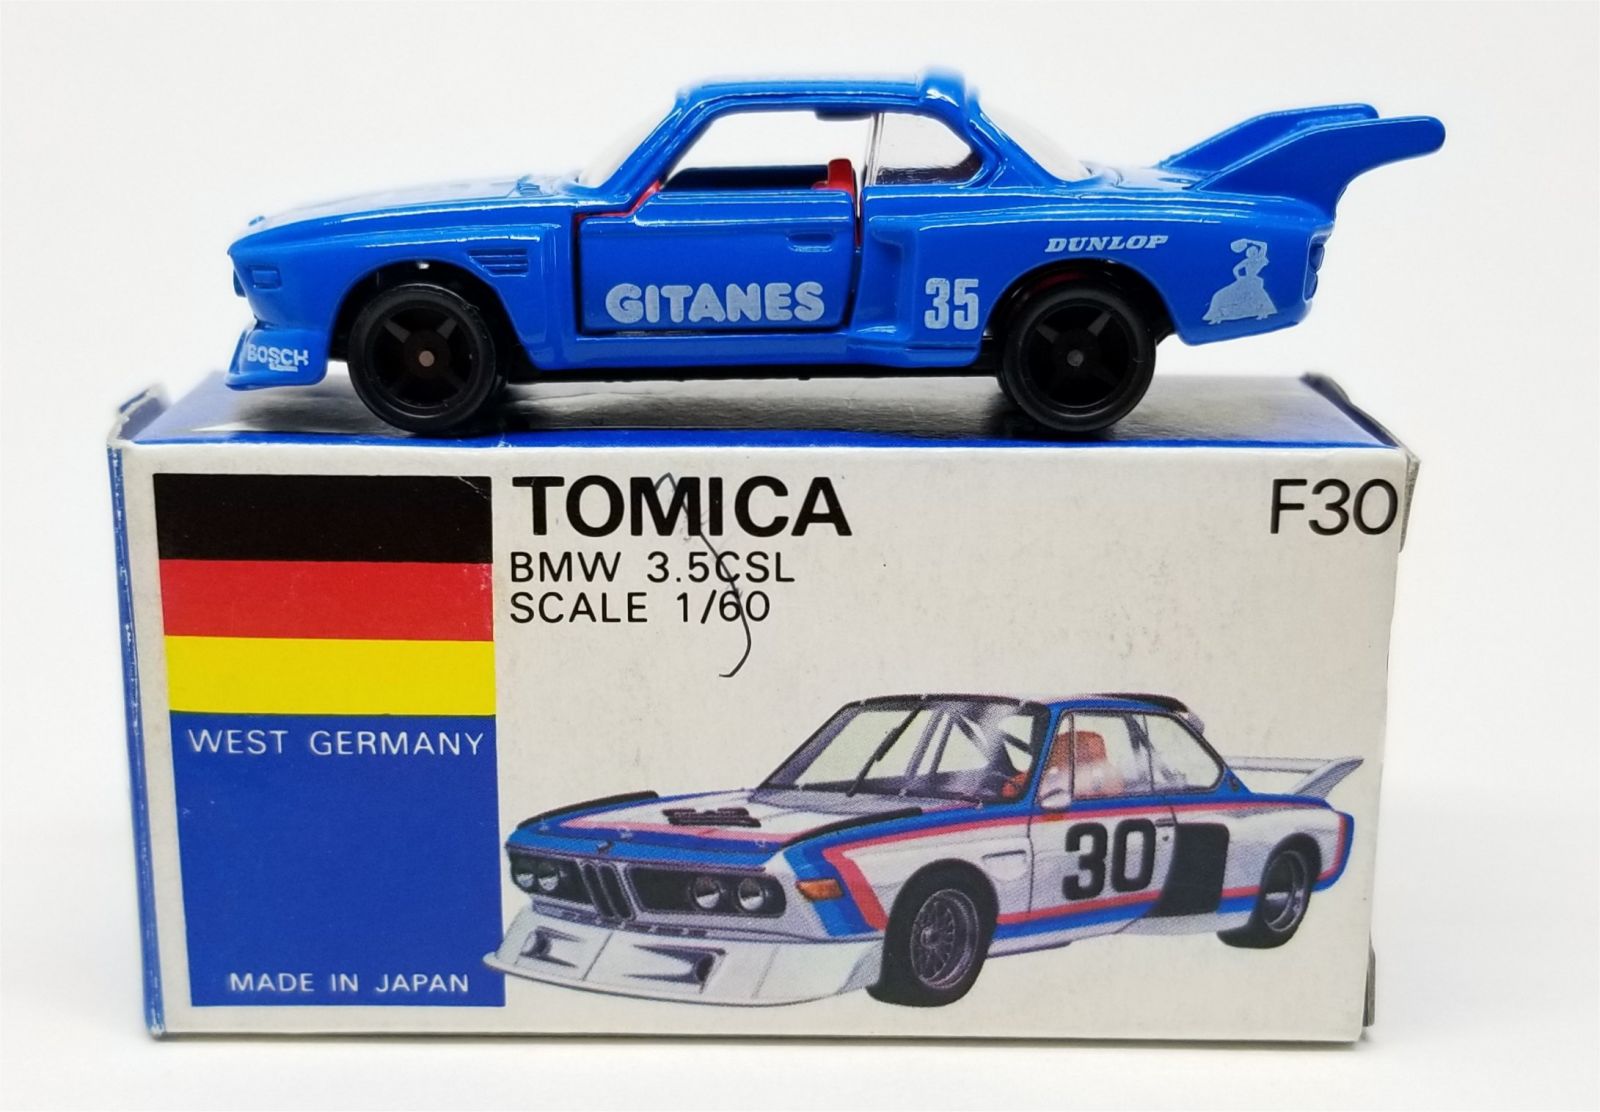 Illustration for article titled LaLD ///May: Tomica BMW 3.5 CSL